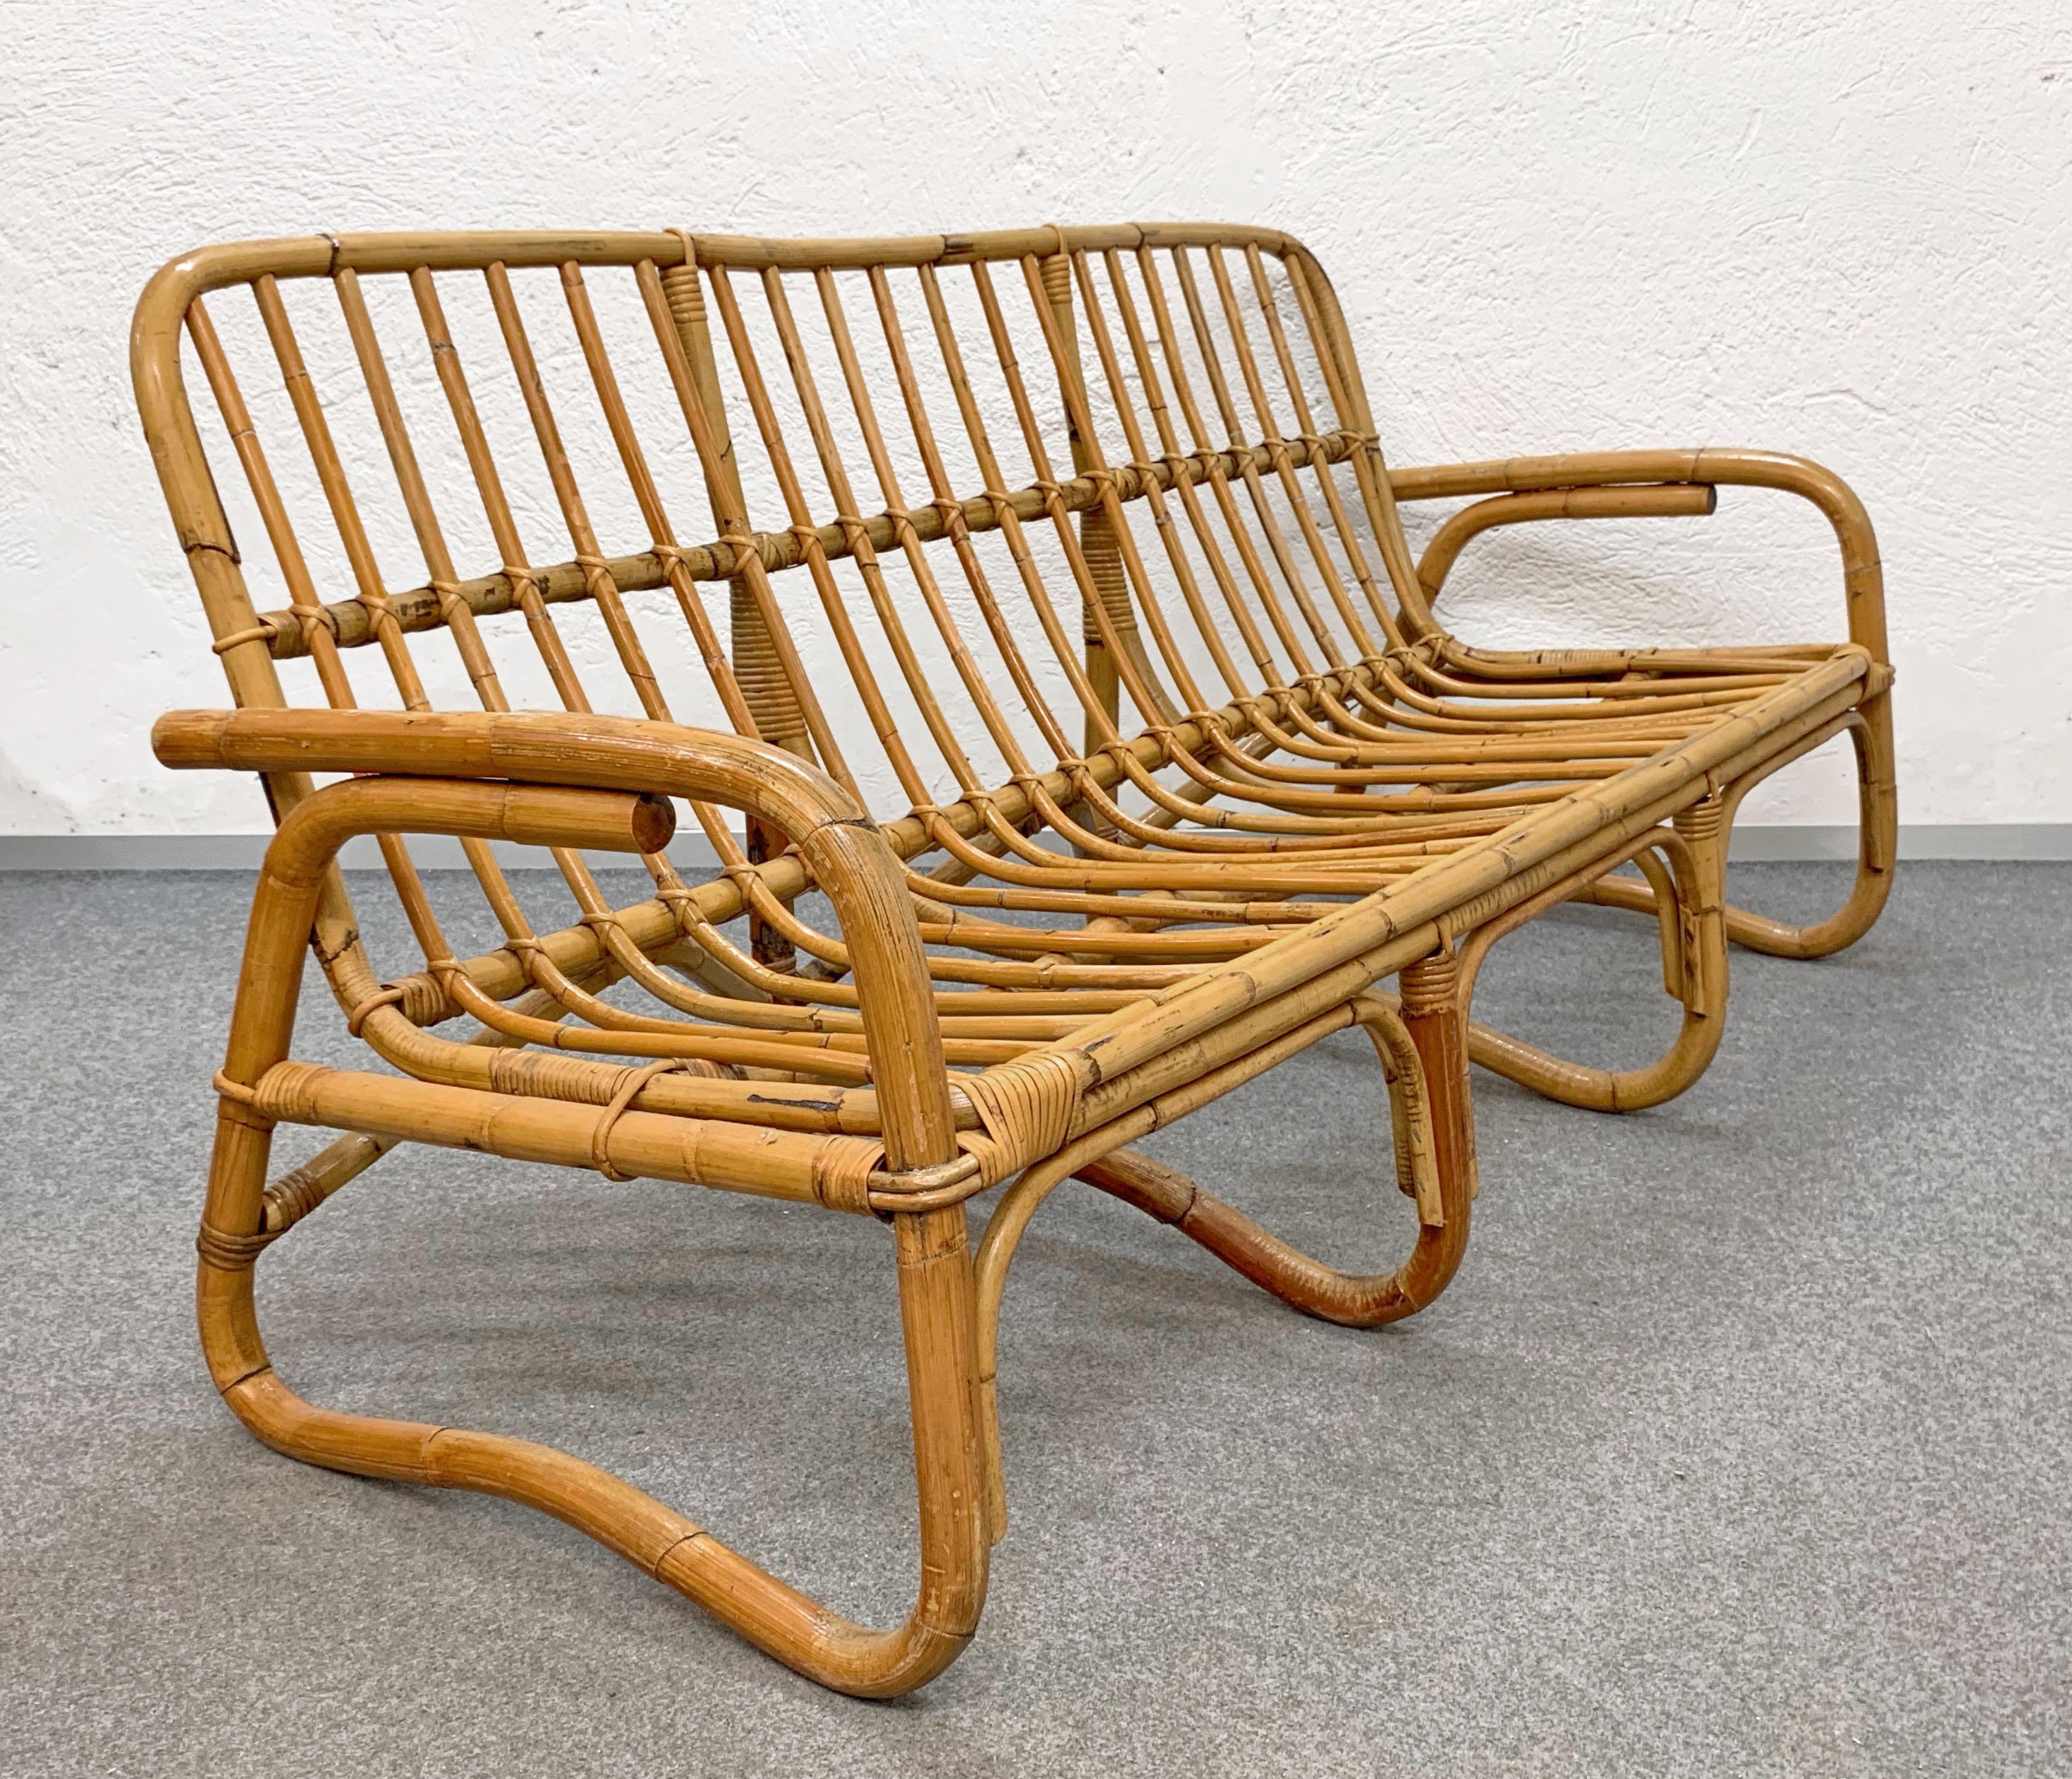 Iconic Mid-Century Modern three-seat sofa in bamboo and rattan. This amazing piece was produced in Italy during 1960s. 

This wonderful piece has a structure in curved and woven rattan and it is in good vintage conditions, with some signs of